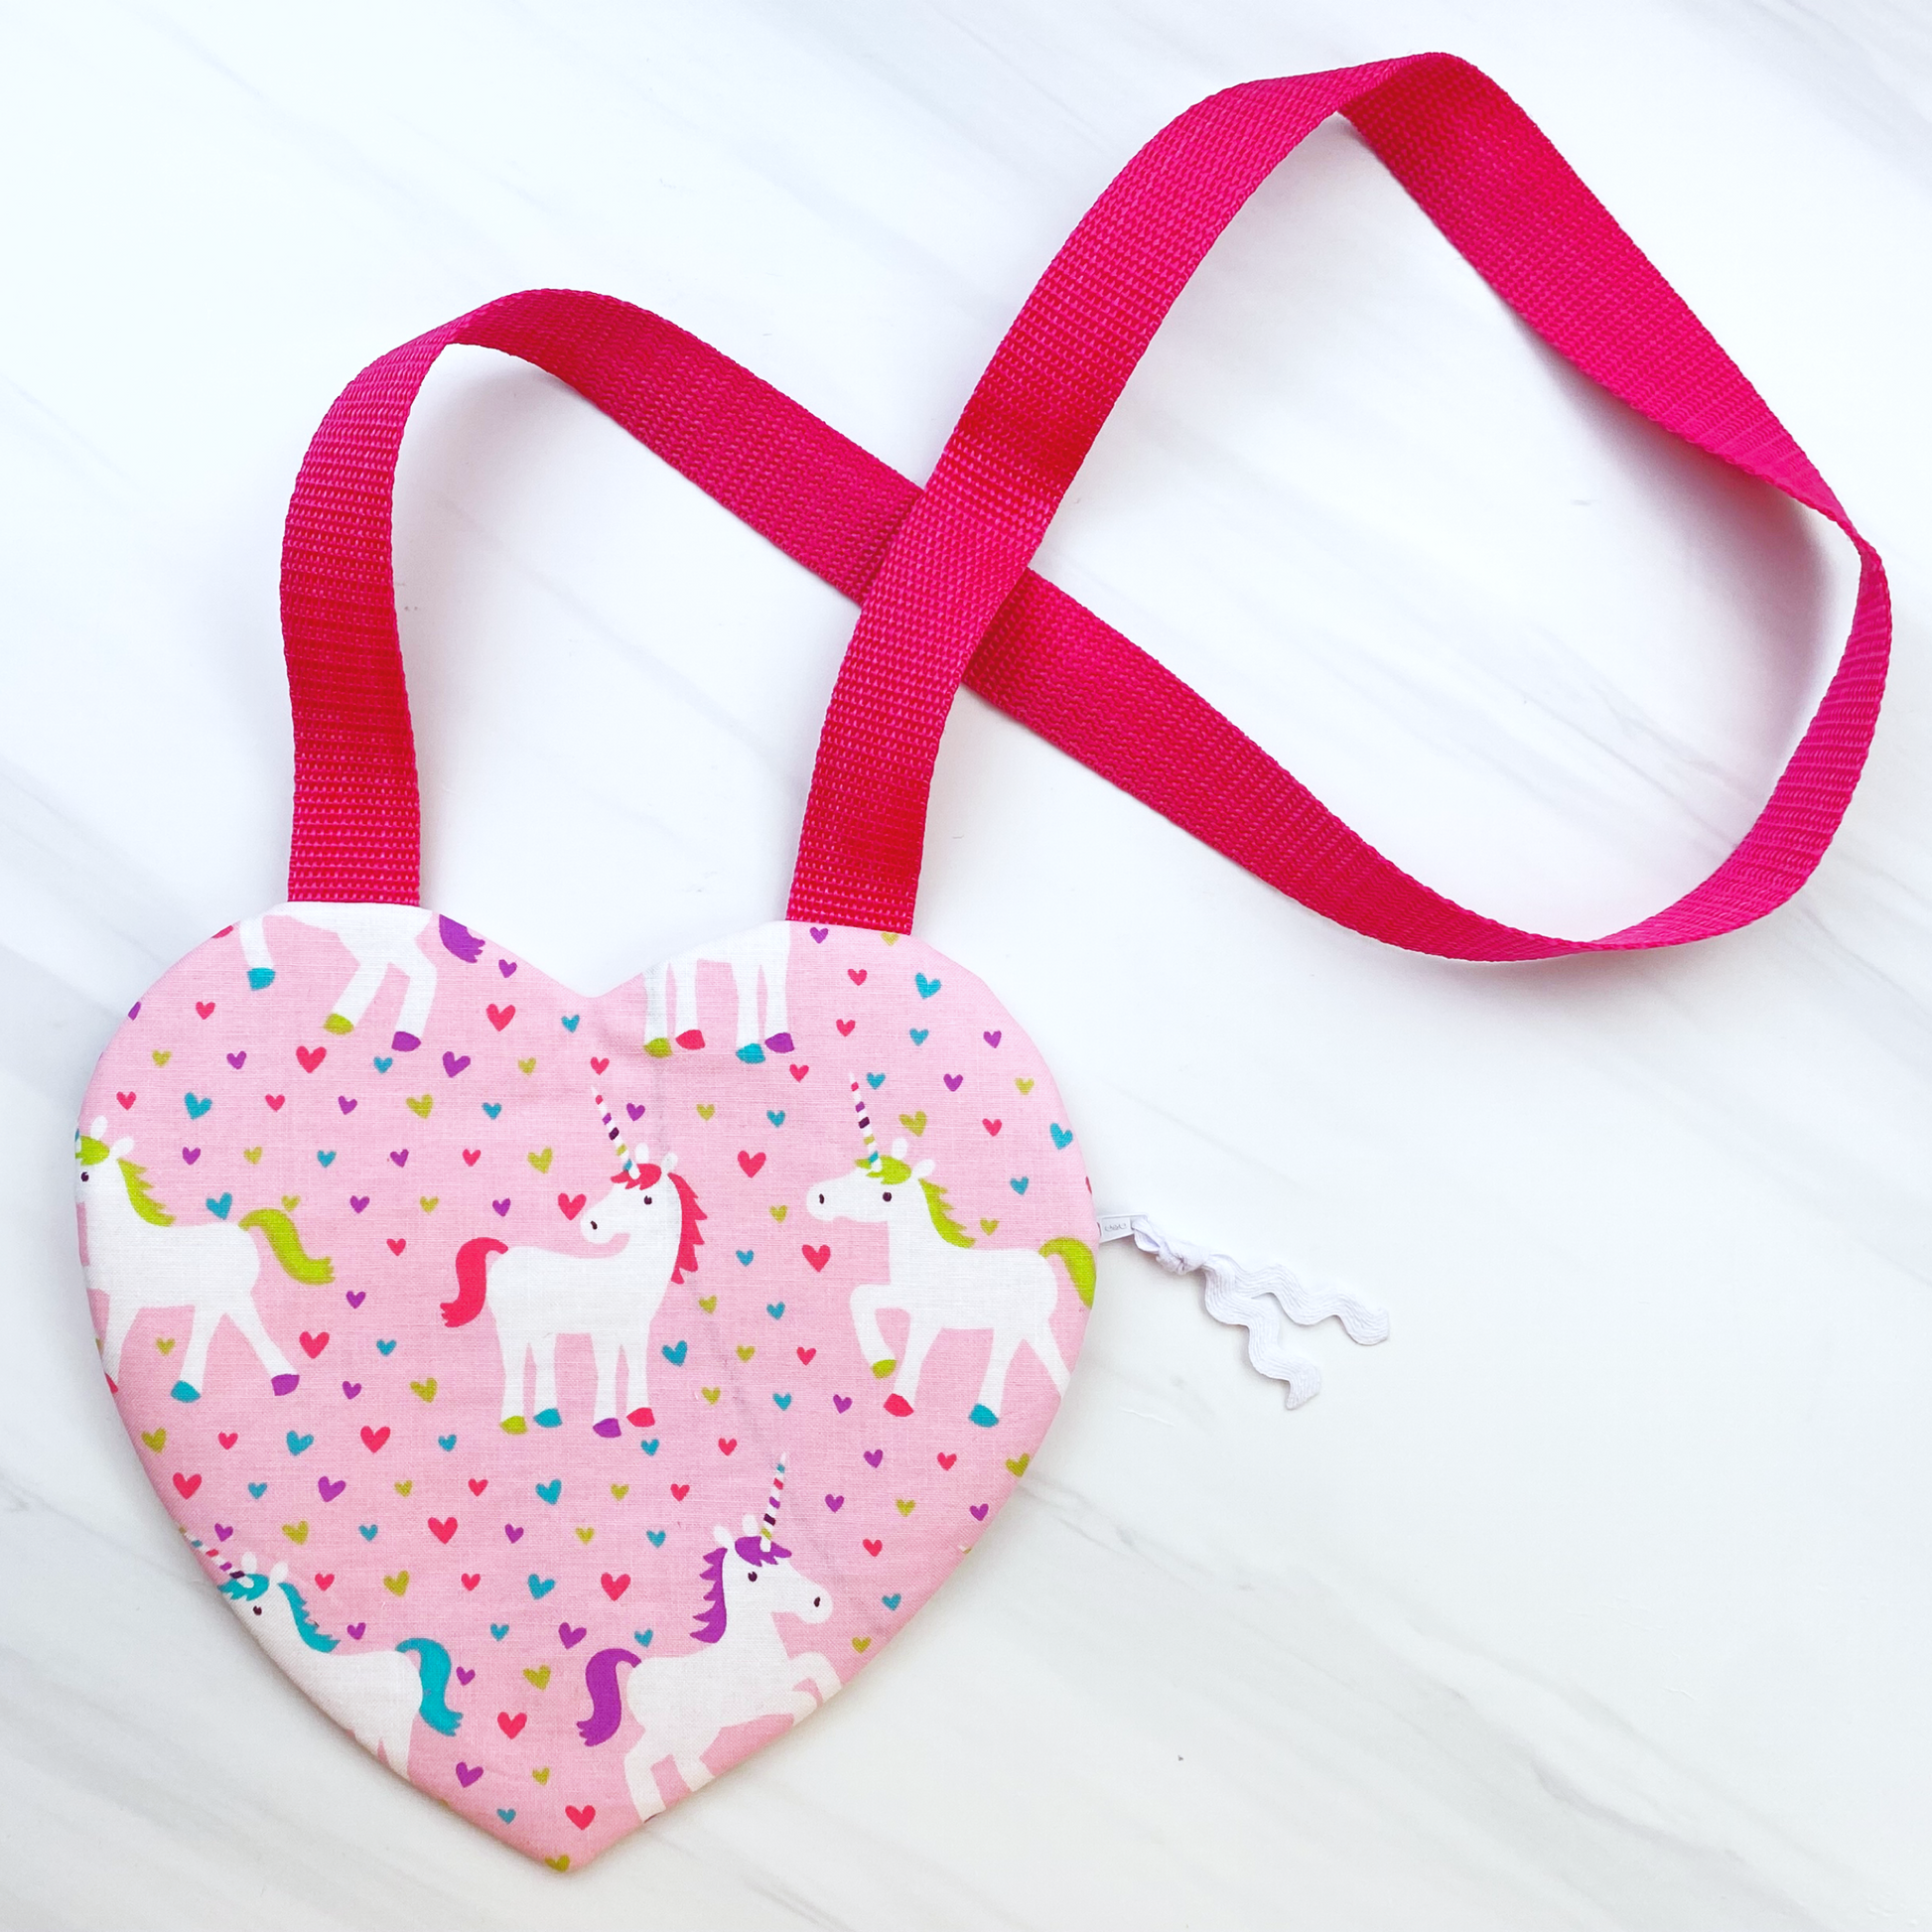 How to sew an easy beginners heart shaped purse or zipper pouch for toddlers girls Valentine’s Day sewing projects by aloha sewing company